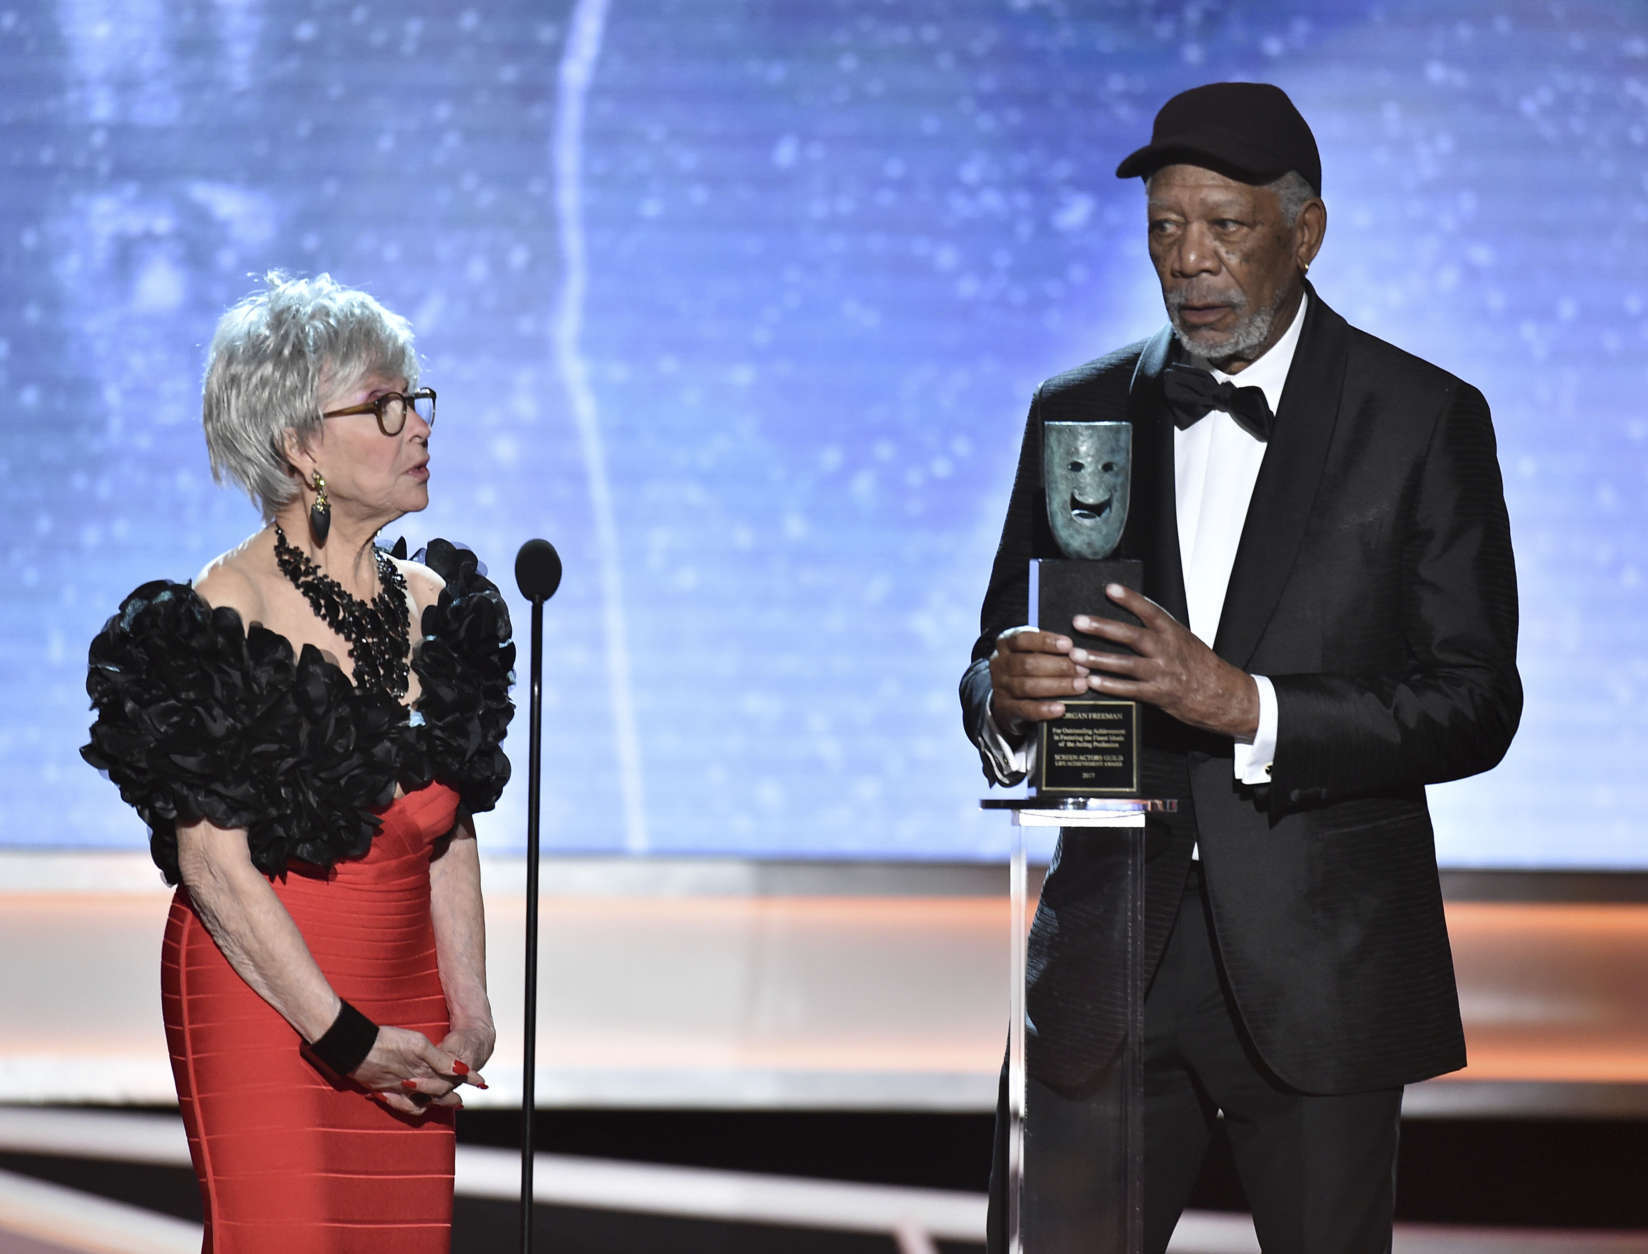 Rita Moreno, left, looks on as Morgan Freeman accepts the Life Achievement Award at the 24th annual Screen Actors Guild Awards at the Shrine Auditorium &amp; Expo Hall on Sunday, Jan. 21, 2018, in Los Angeles. (Photo by Vince Bucci/Invision/AP)